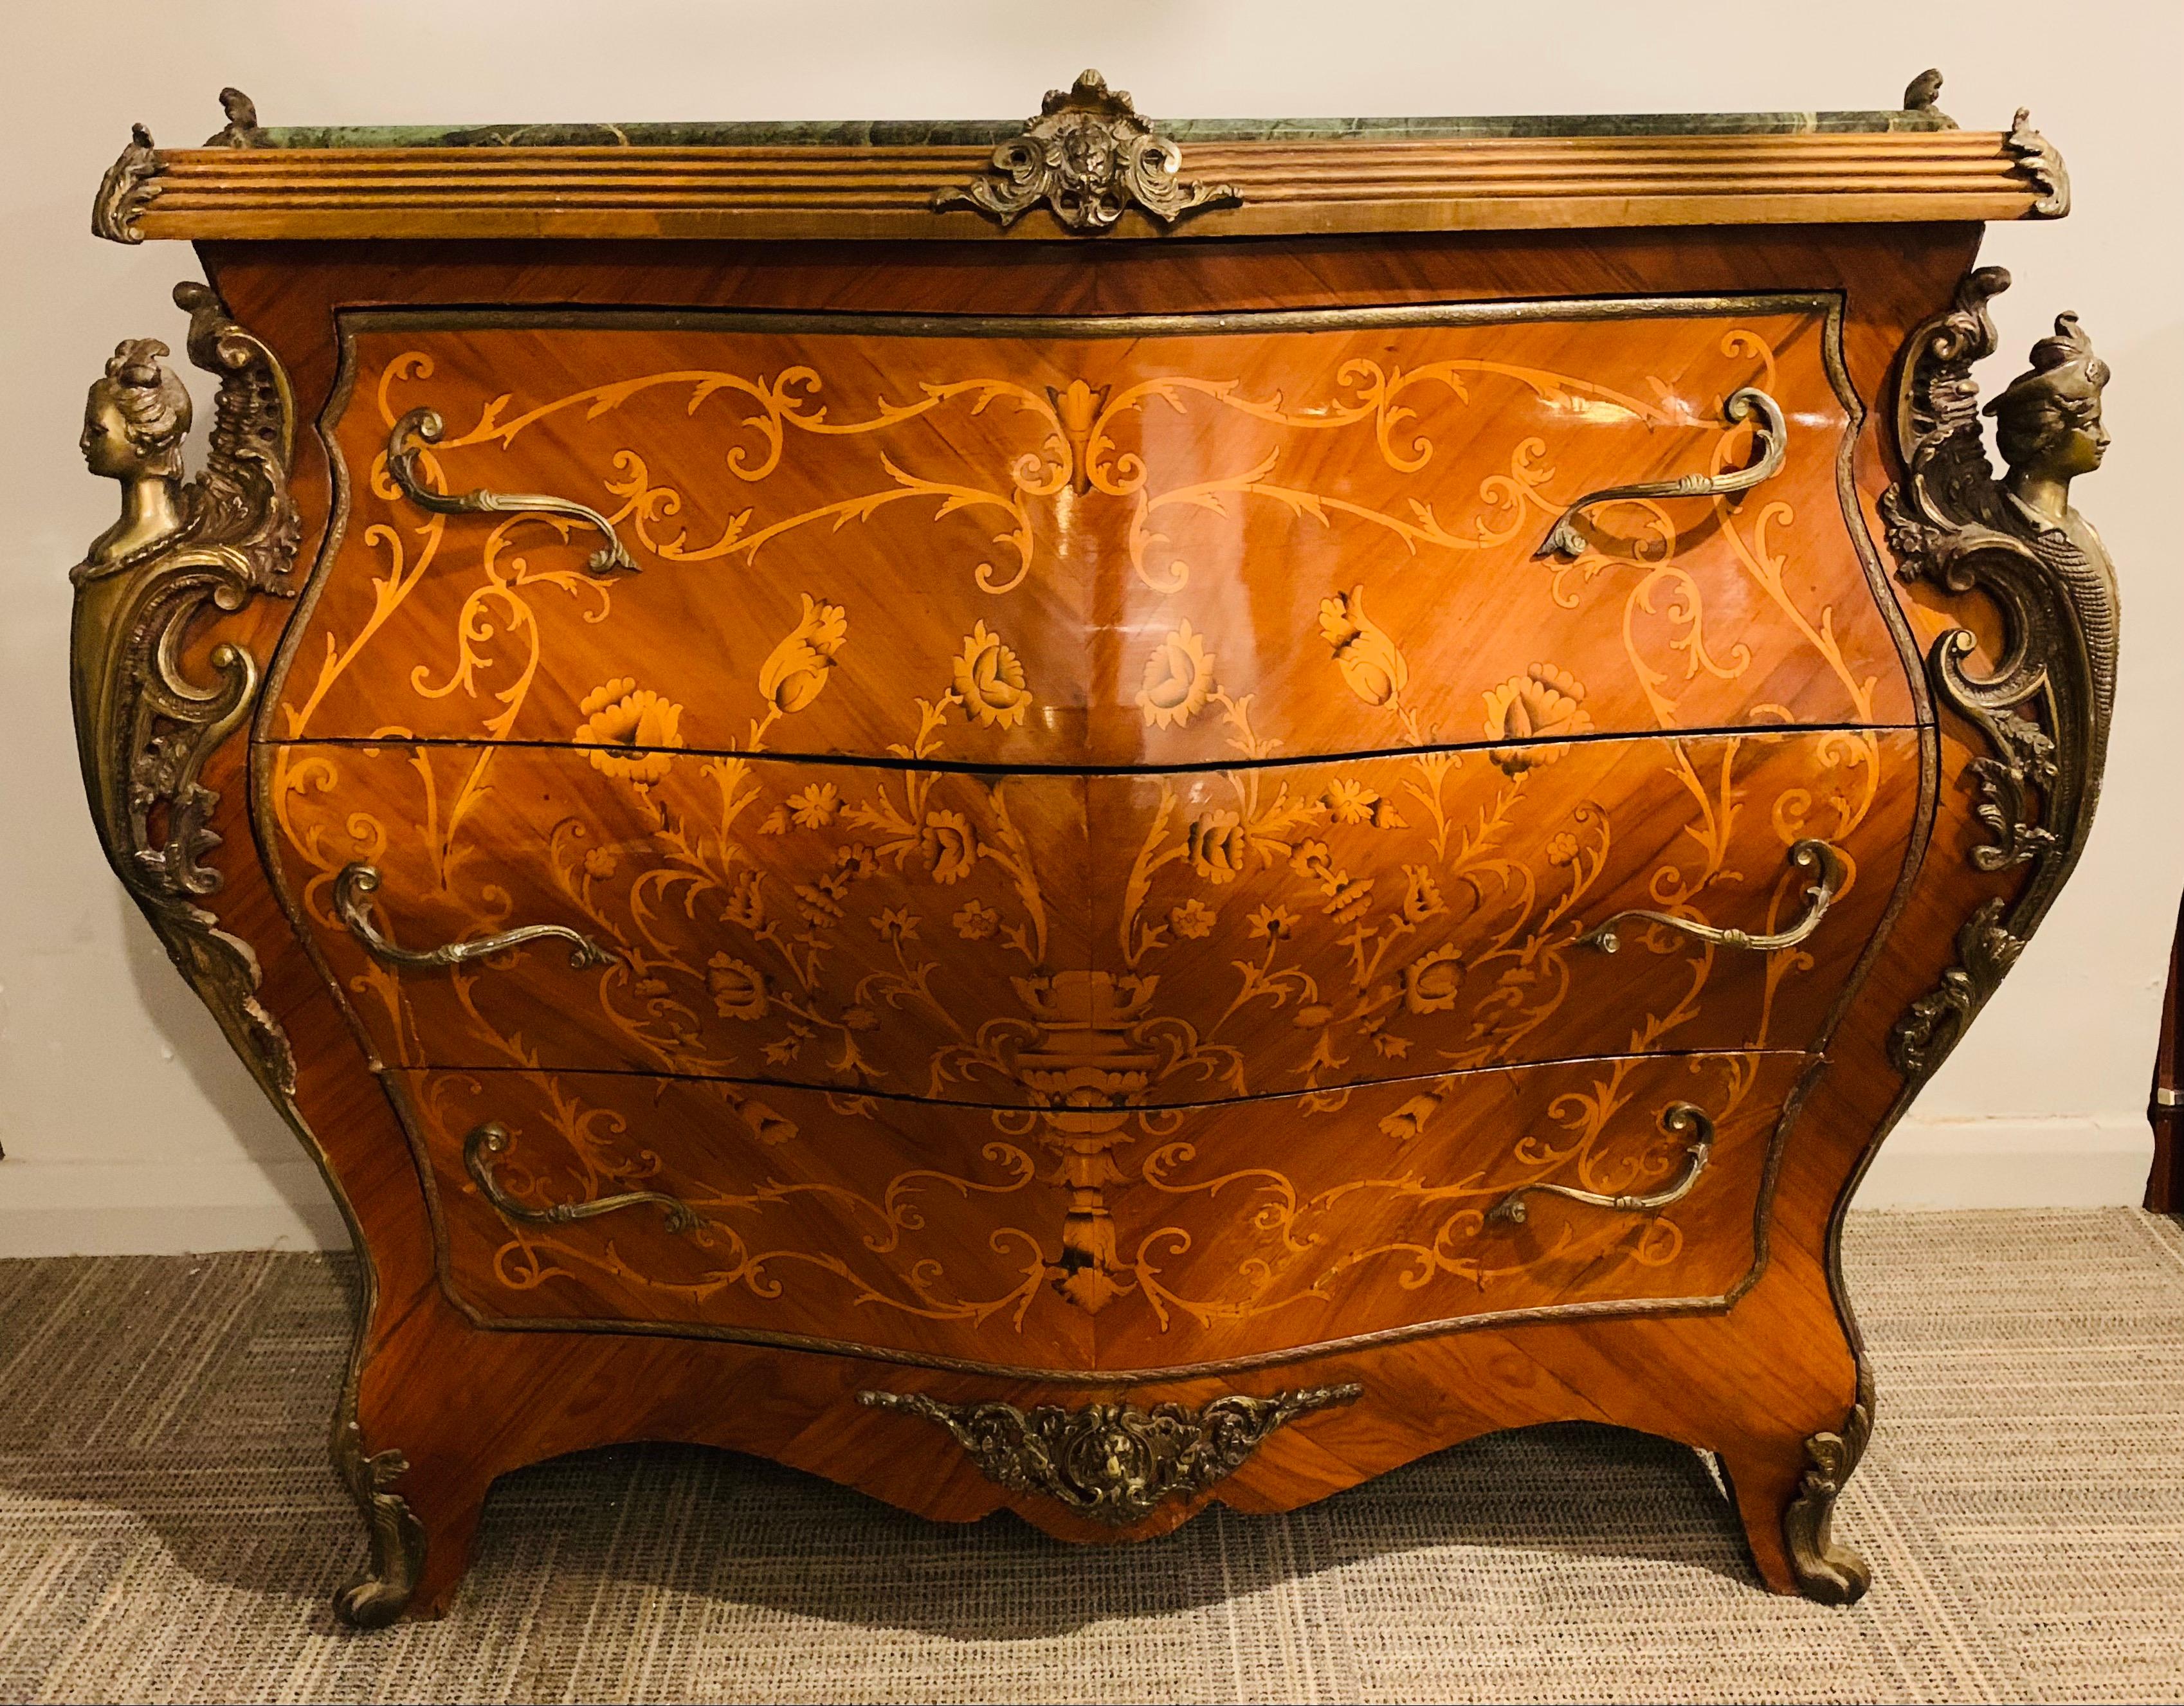 A beautiful French Louis XV style bombe chest with a contoured and beveled green marble-top, three-drawers with detailed ornate parquetry inlay dating from around the early to mid 20th century. The shapely three contoured drawers of varying sizes